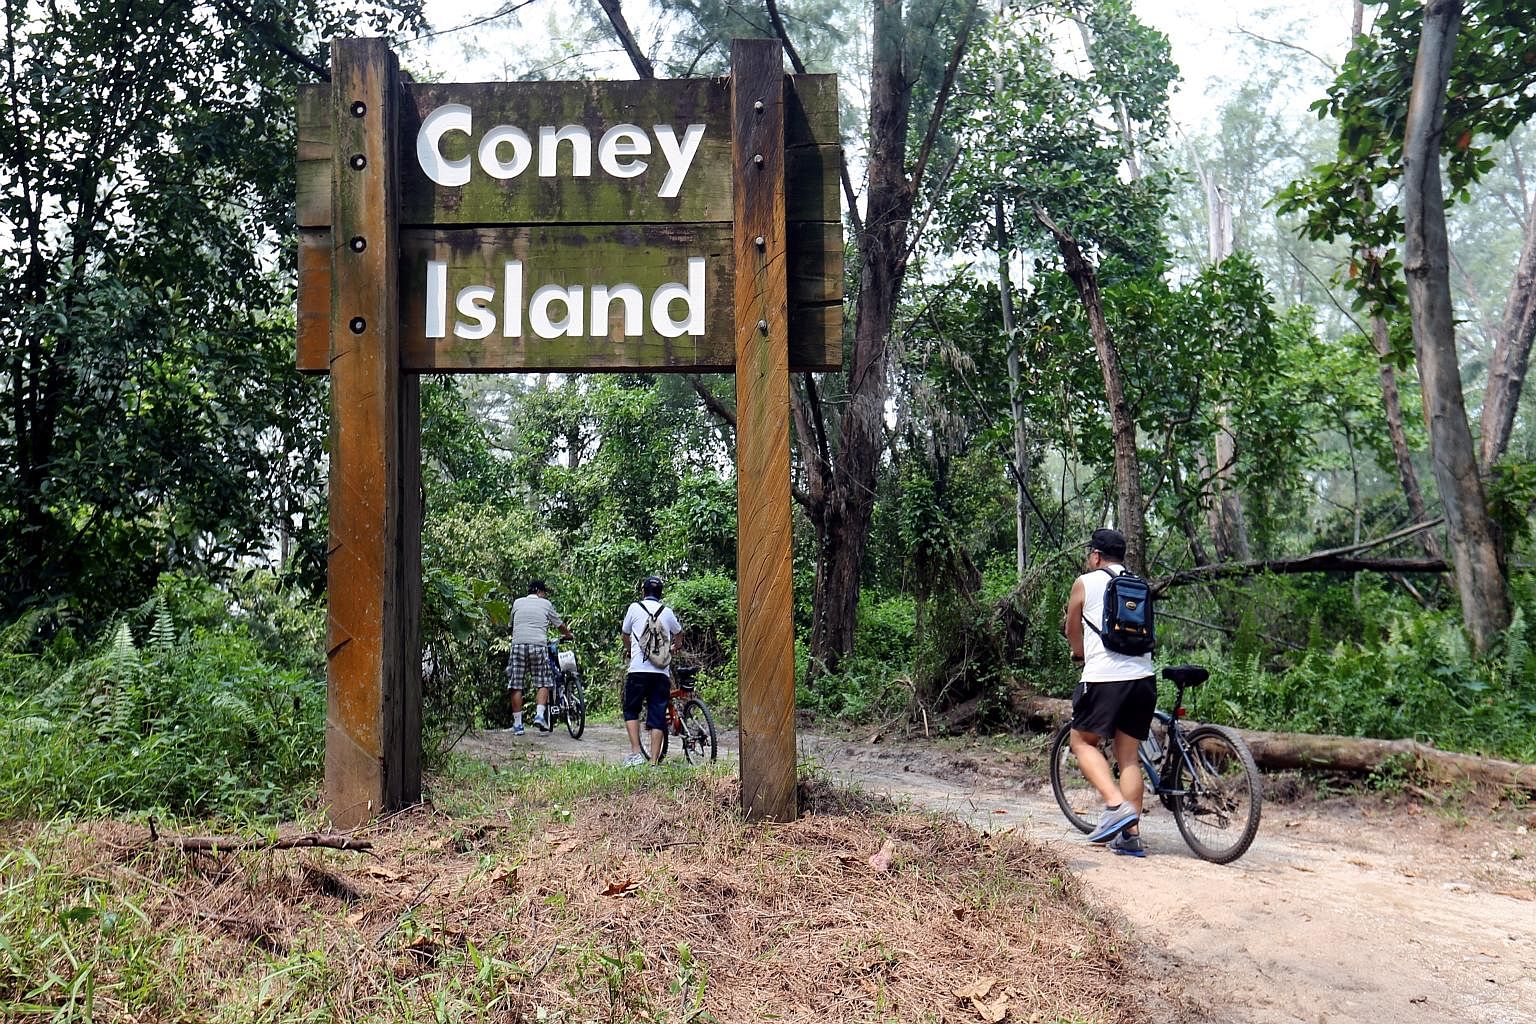 Instead of a housing development for the non-park portion of Coney Island, the writer recommends building eco-friendly structures, such as small low-rise chalets, camps and canoeing clubs, that can be integrated into the nature park area.